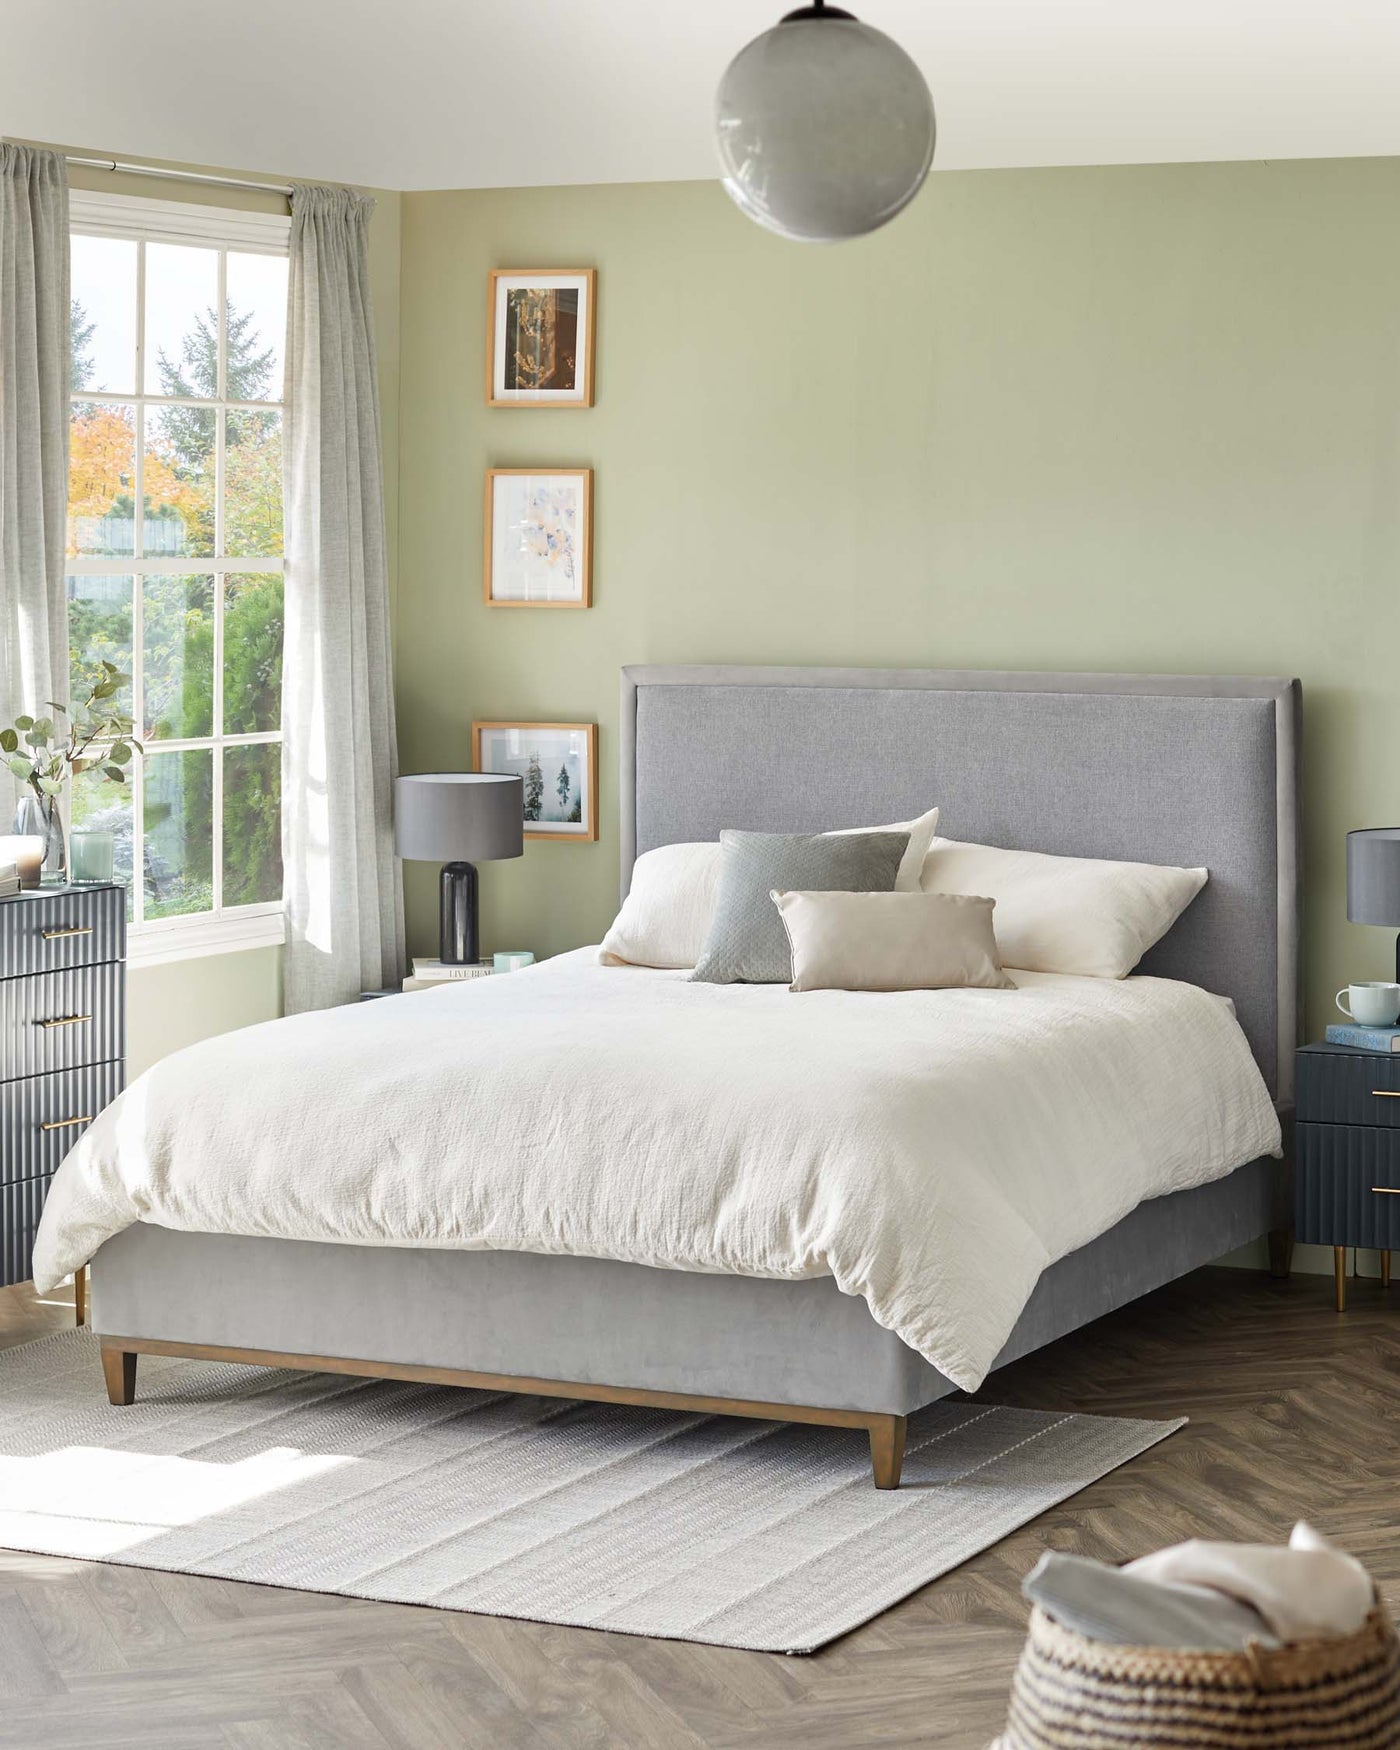 Contemporary styled bedroom featuring a upholstered platform bed with a high headboard in light grey fabric, flanked by two round navy blue bedside tables with brass accents. A subtle grey area rug is laid out beneath the bed, and a woven dark and light brown basket sits at the foot of the bed to the right.